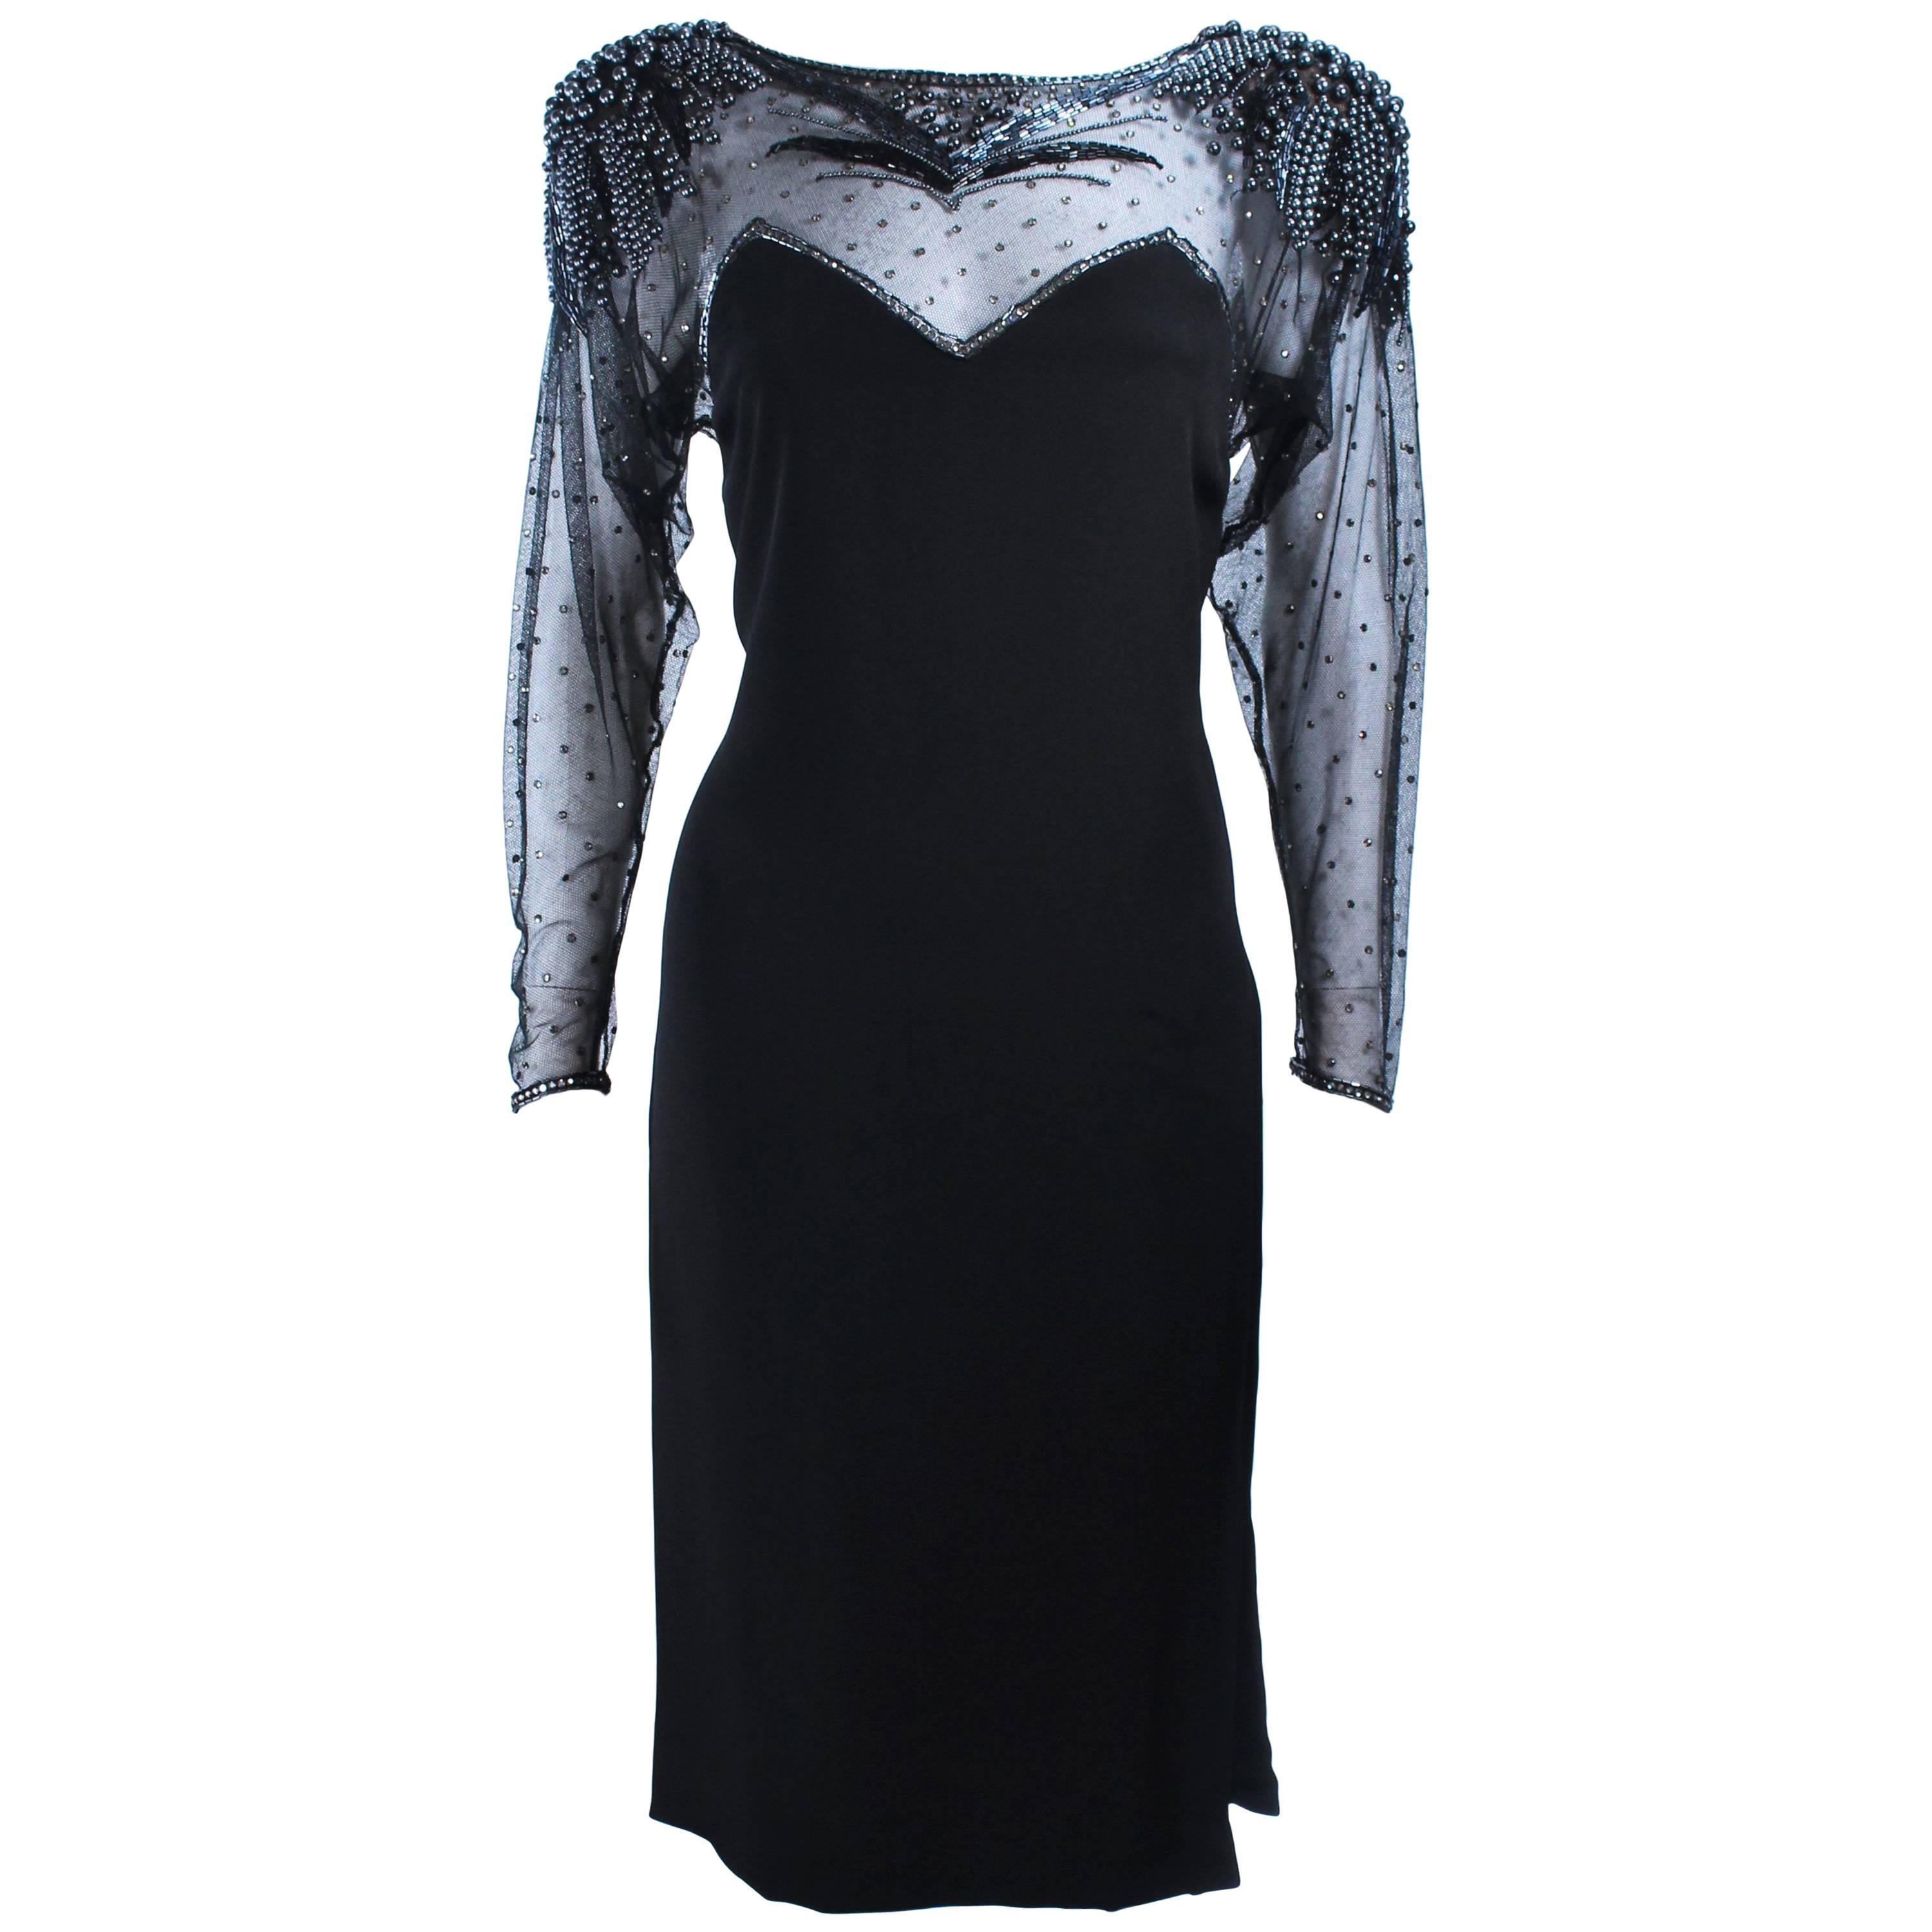 FRANK COMPOSTO Black Cocktail Dress with Sheer Beaded Sleeves Size 8 For Sale